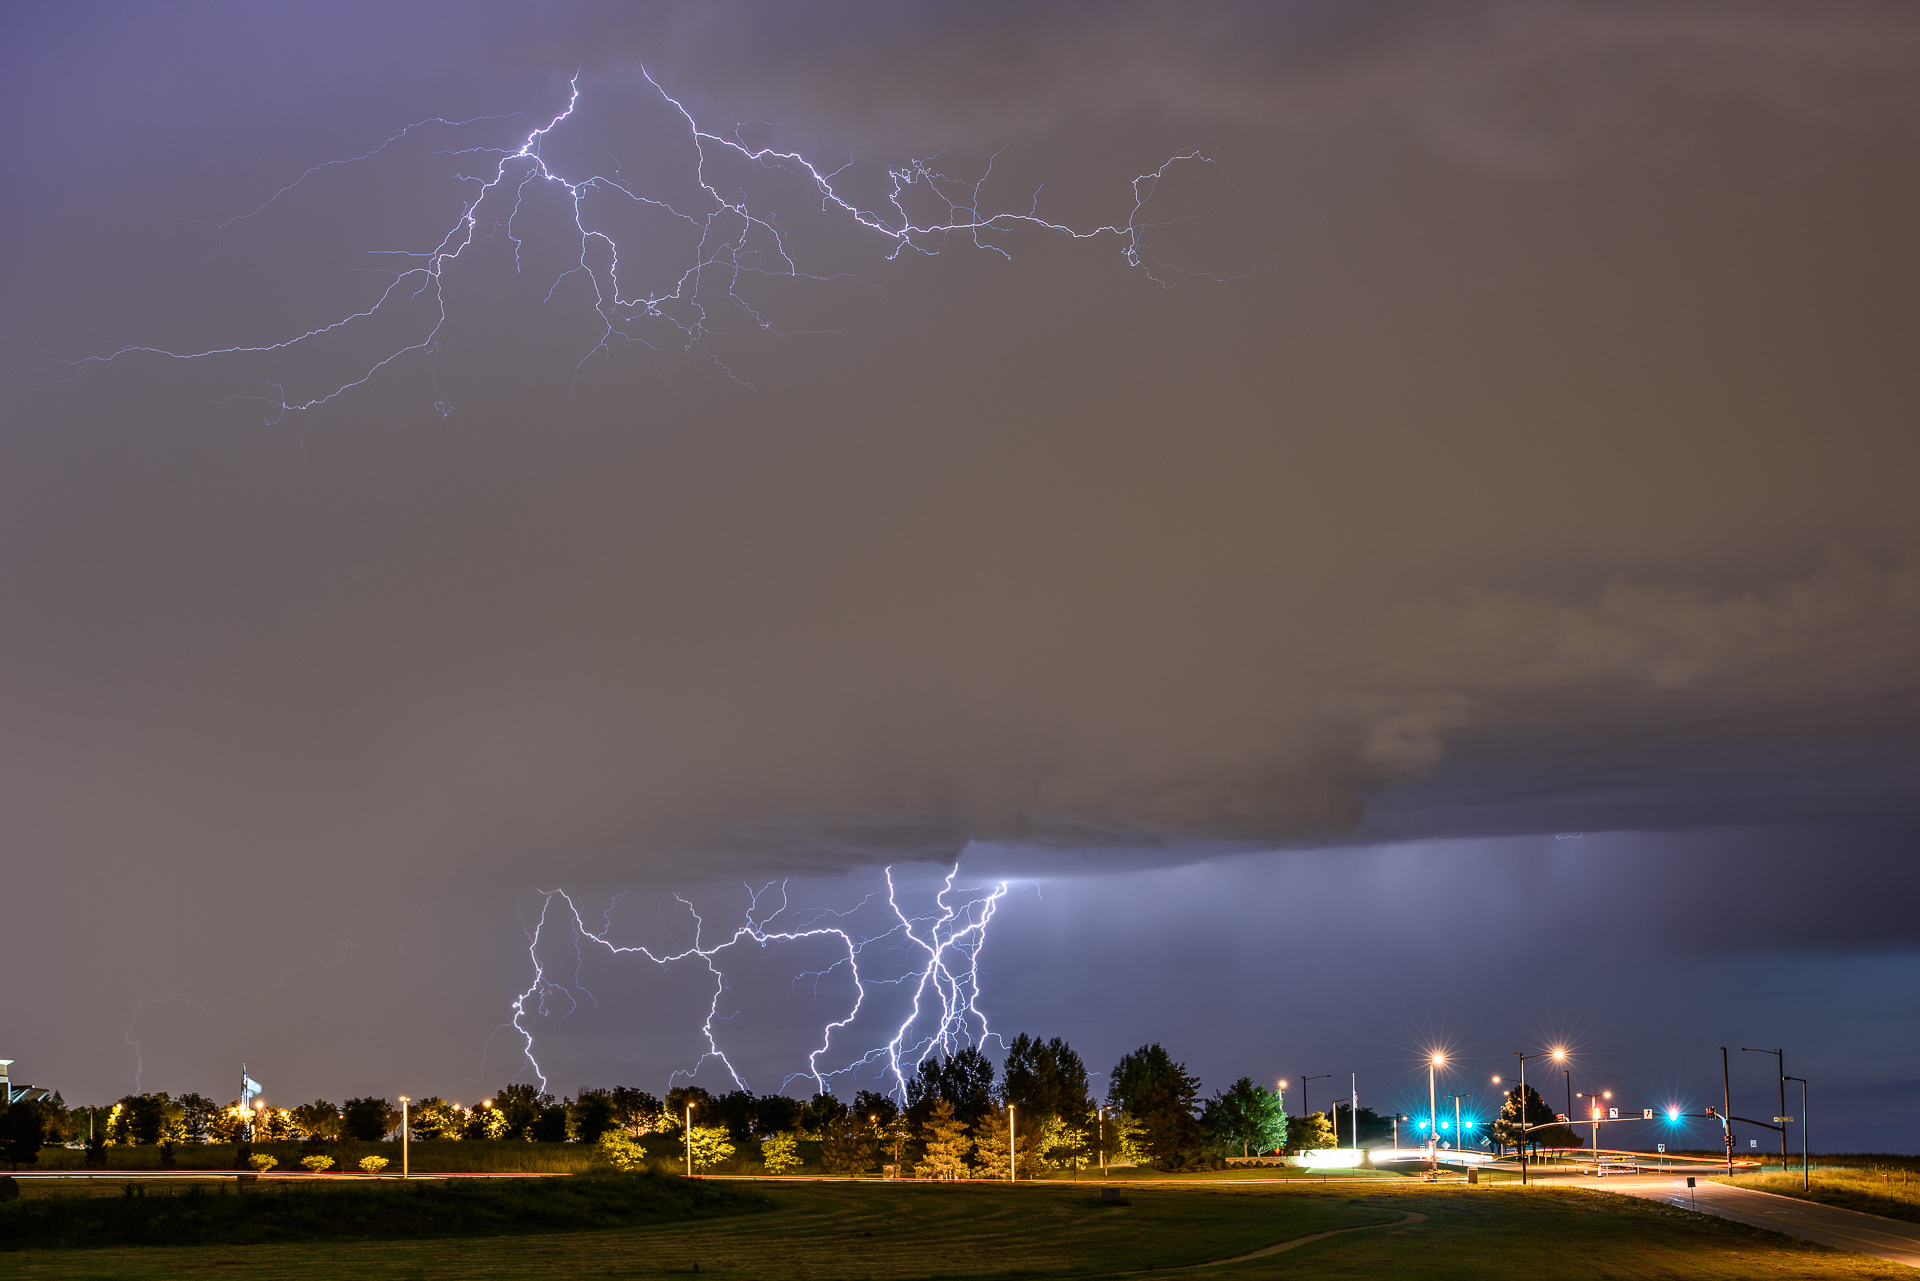 How to Photograph Lightning and Get Amazing Results